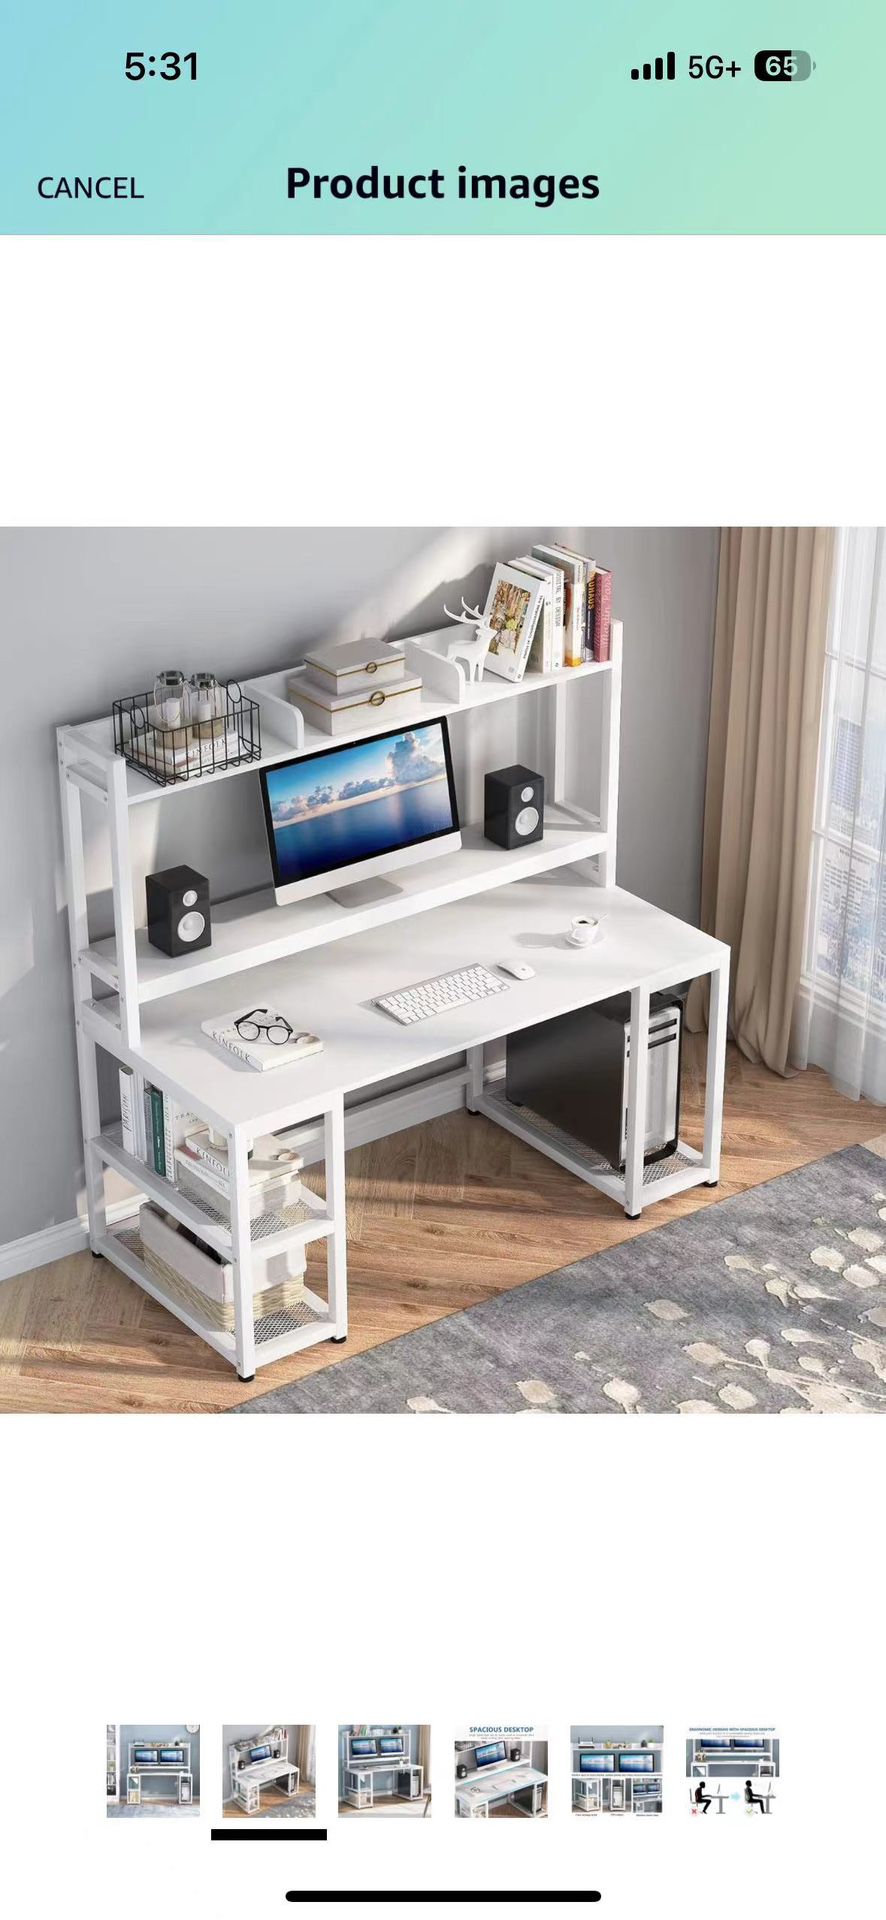  55 Inches Computer Desk with Hutch and Monitor Stand Riser, Rustic Industrial Desk Computer Table Studying Writing Desk Workstation with Storage Shel